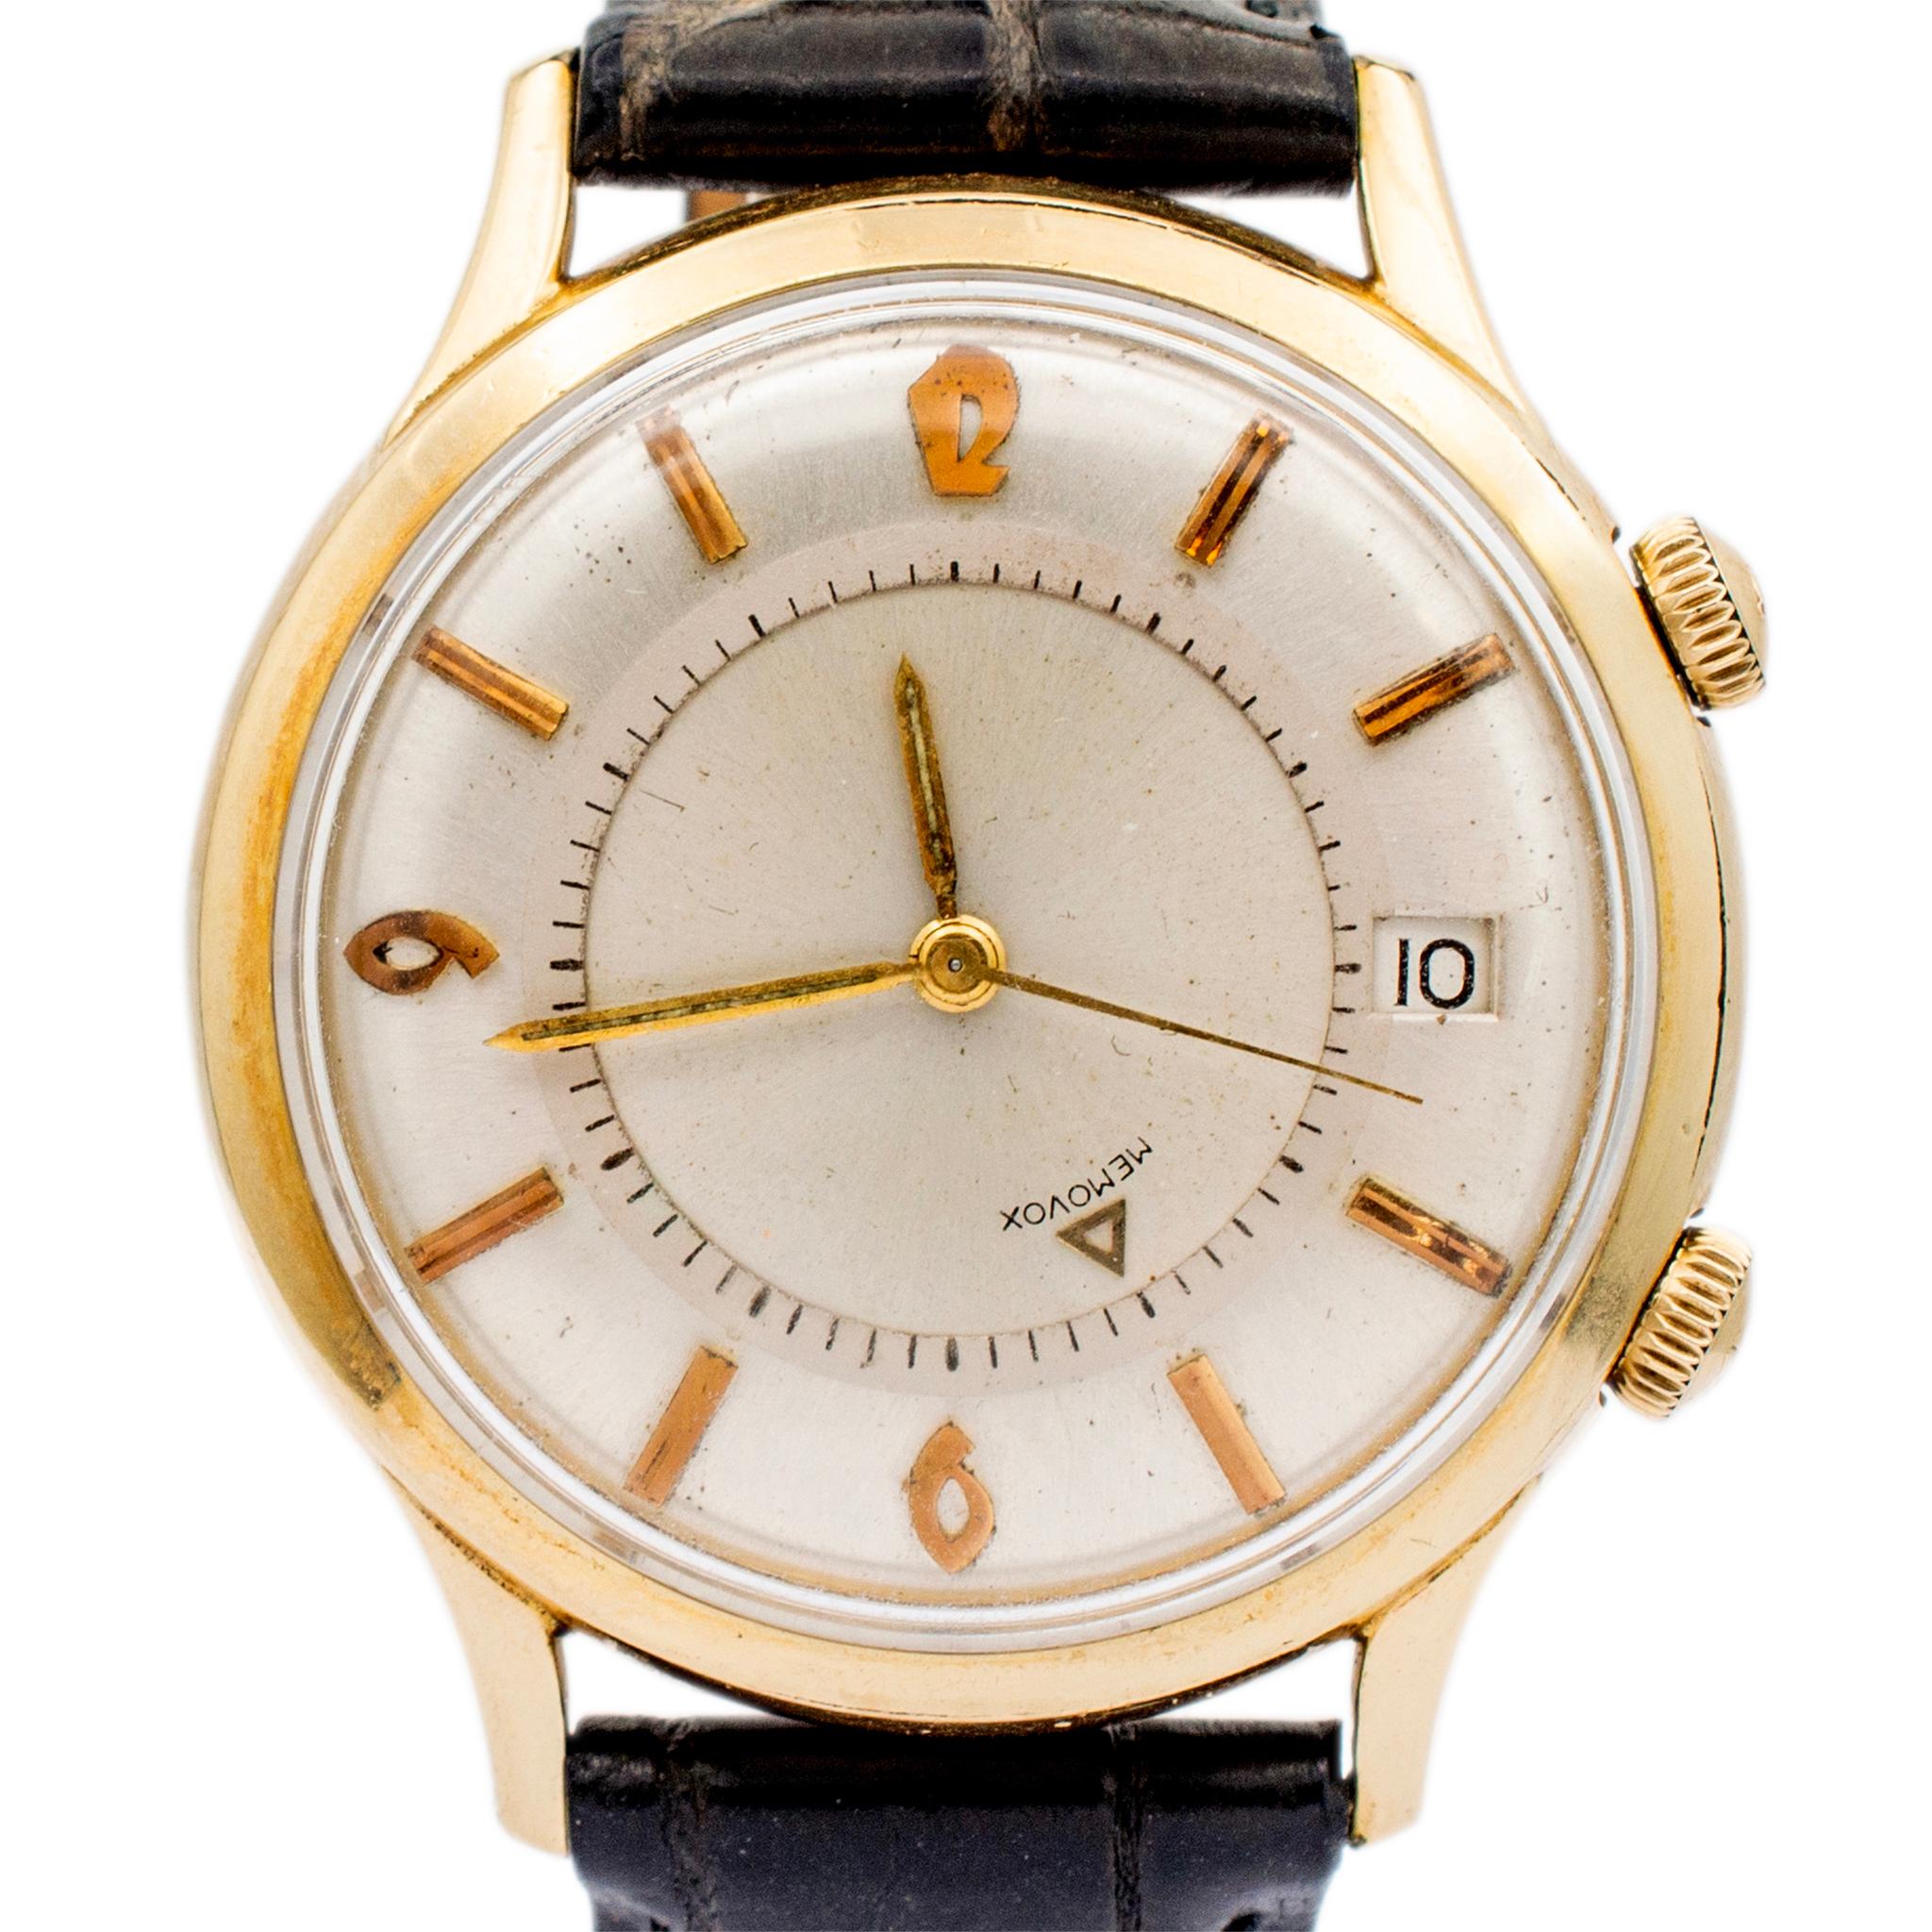 Brand: Jaeger-Lecoultre

Diameter: 38.00 mm

Strap width: 19.0mm

Length: 8.50 inches

Weight: 51.20 grams

Stainless steel and 10K gold filled, Jaeger-LeCoultre Swiss made wristwatch. The watch measures approximately 38.00 mm in diameter and weighs